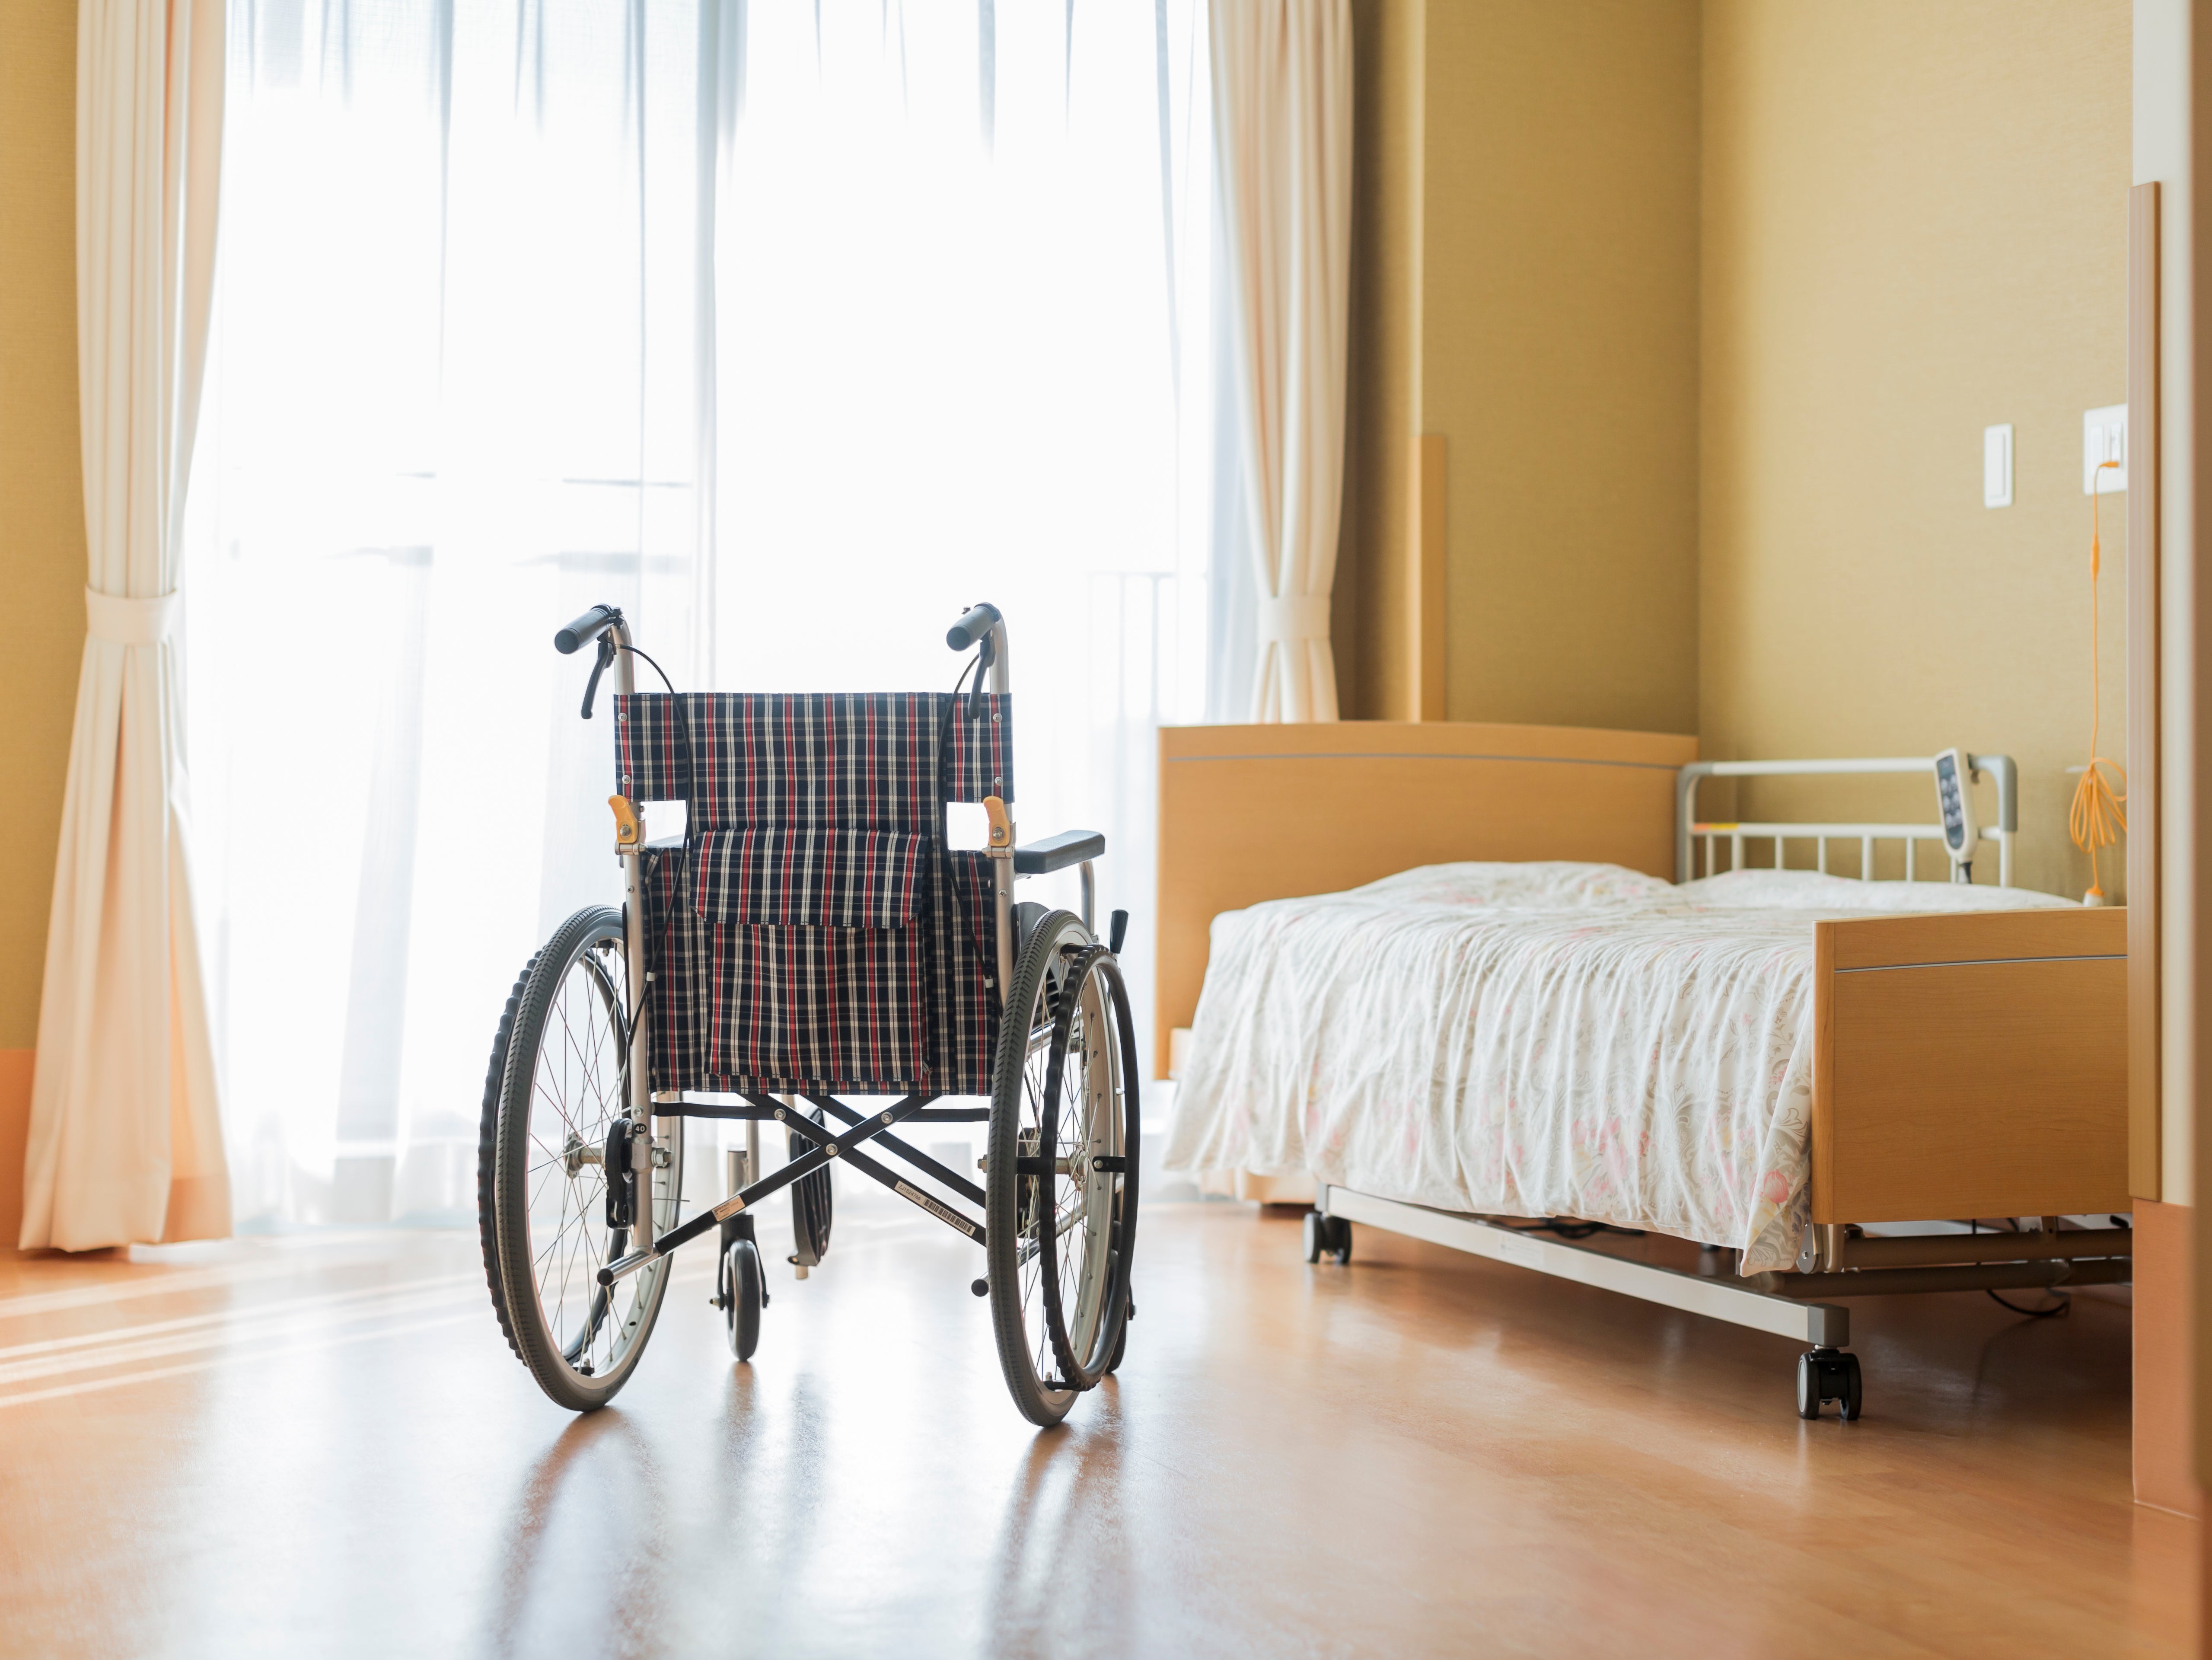 The number of care homes in England has fallen by 10 per cent in six years, according to new figures.